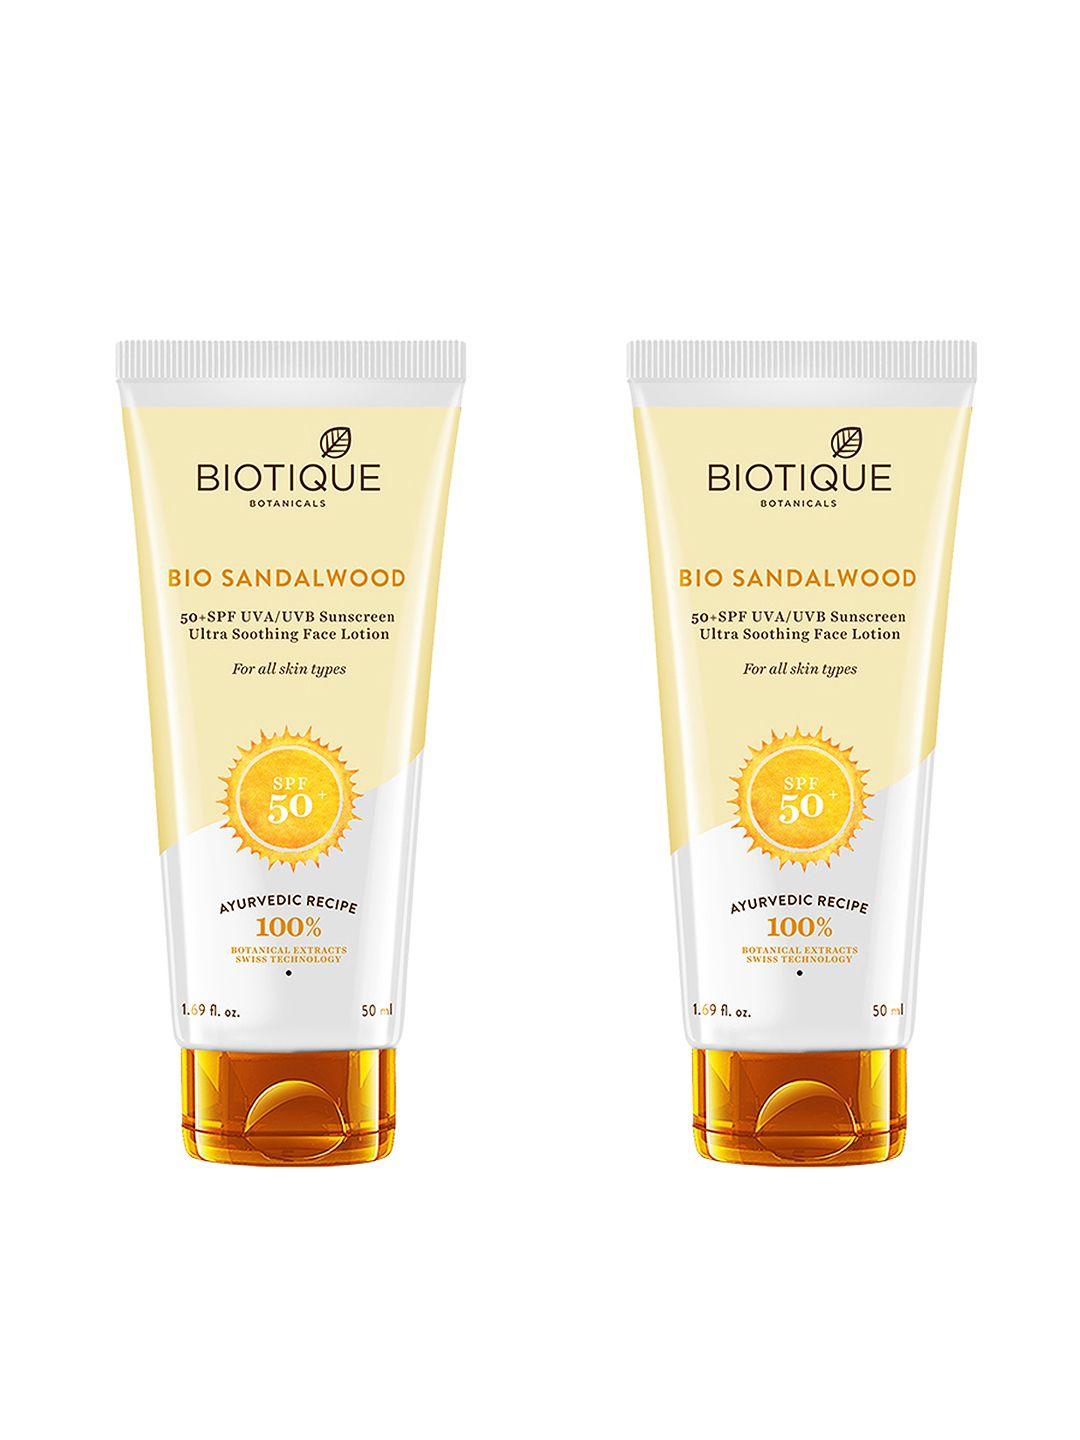 Biotique Sunscreen Lotion Duo SPF 50+